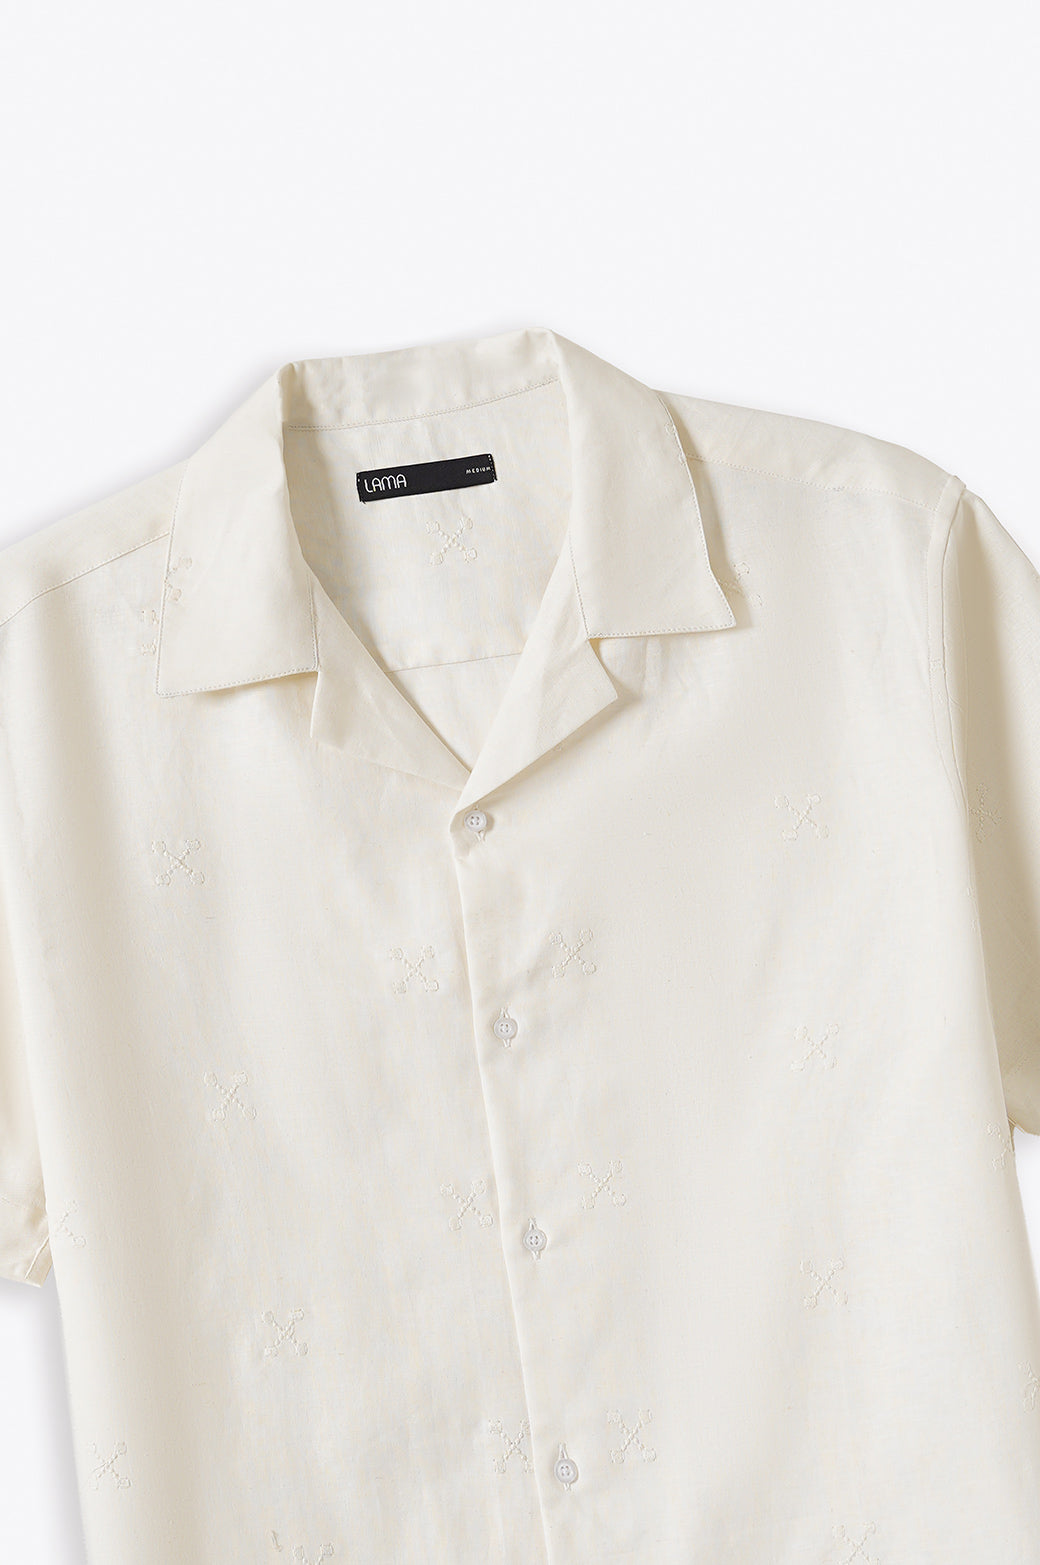 OFF WHITE LINEN EMBROIDERED SHIRT